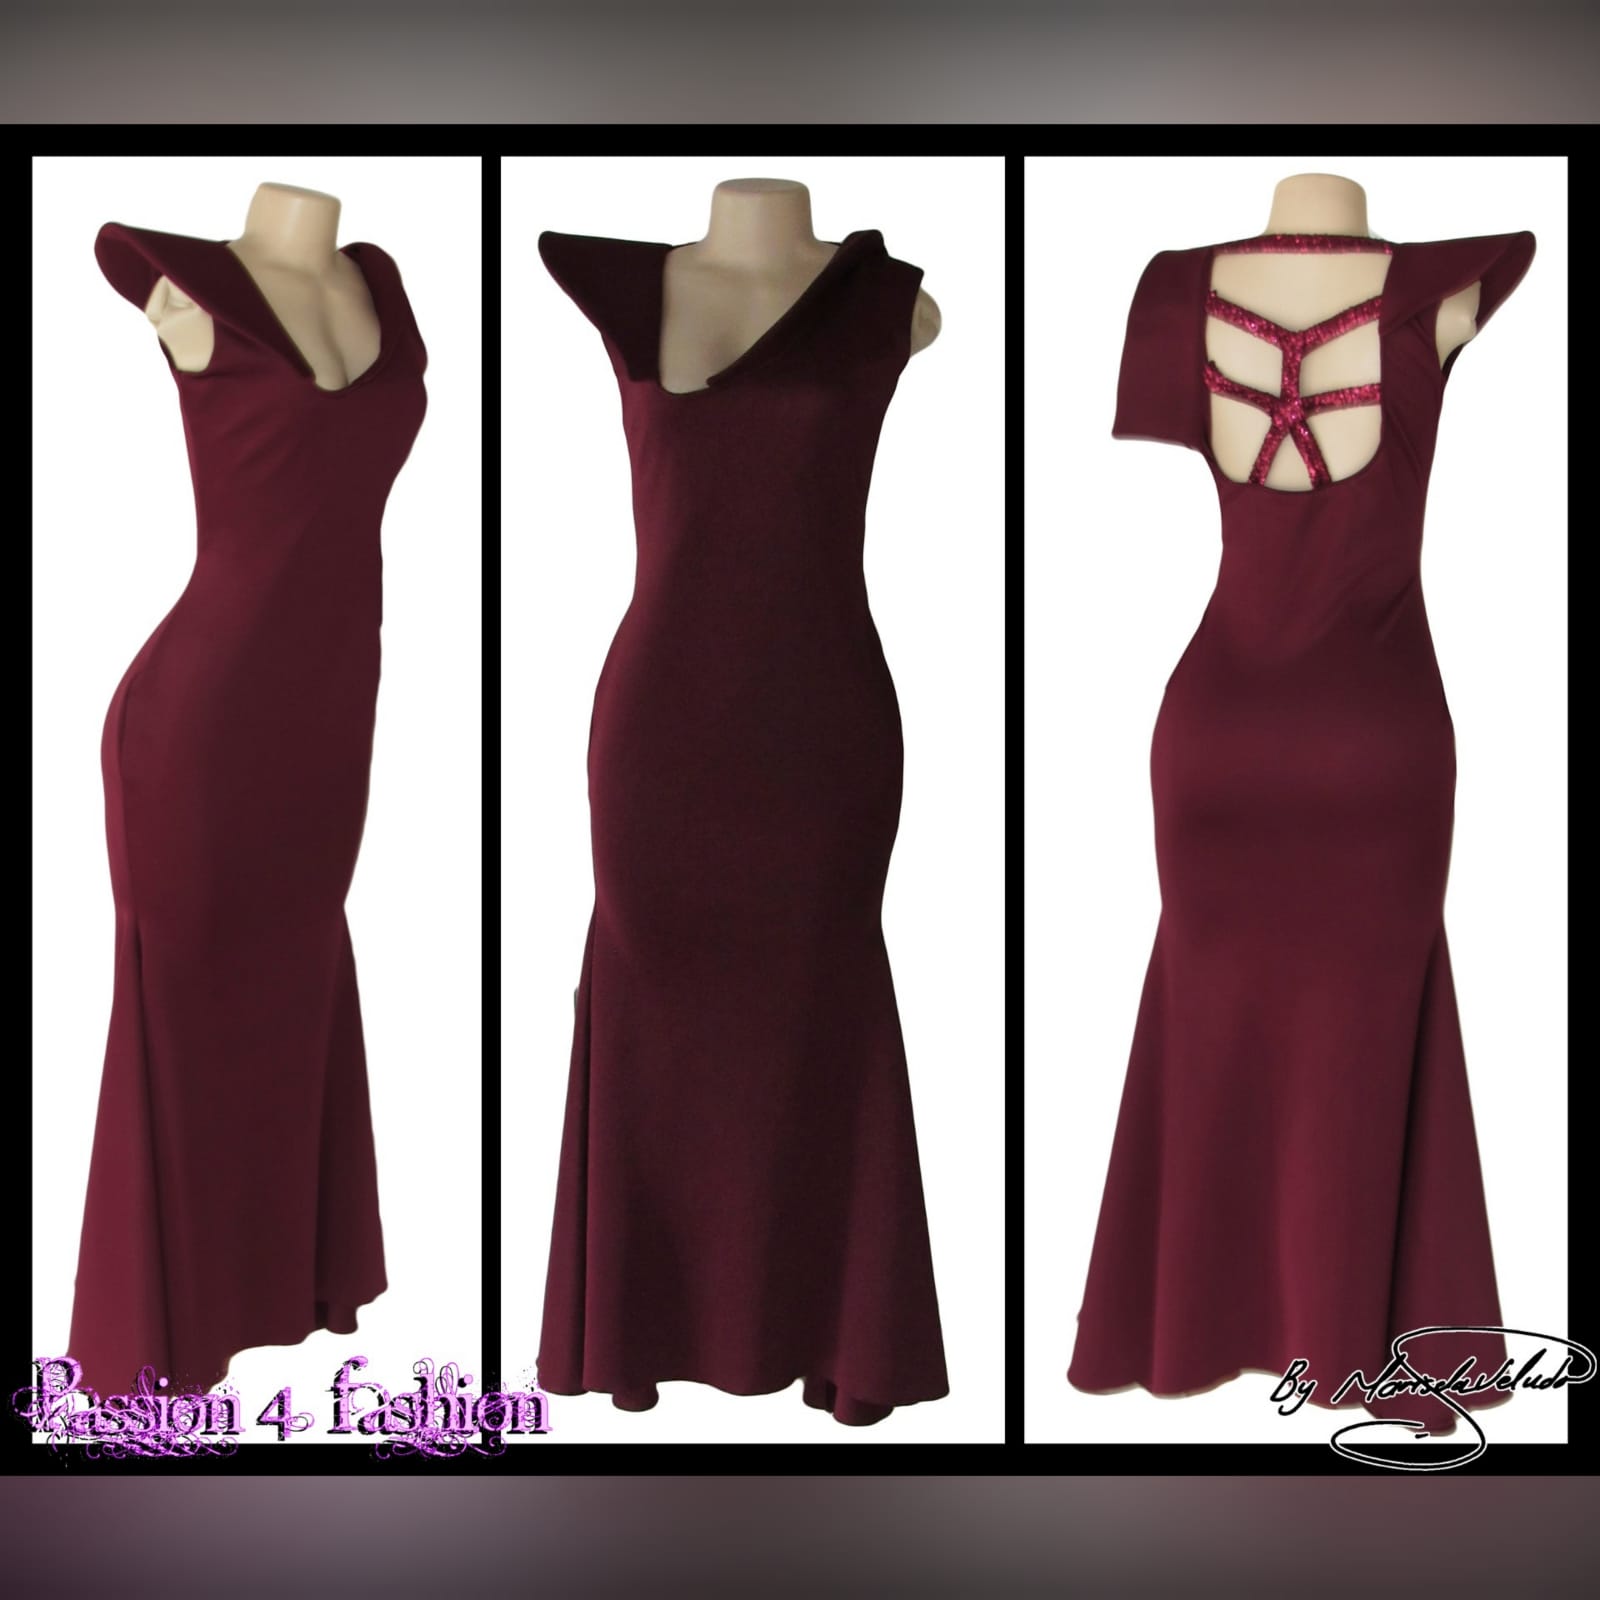 Burgundy tight fitting bridesmaid dress 5 burgundy tight fitting bridesmaid dress with an angled v neckline design. An open back detailed with sequins straps